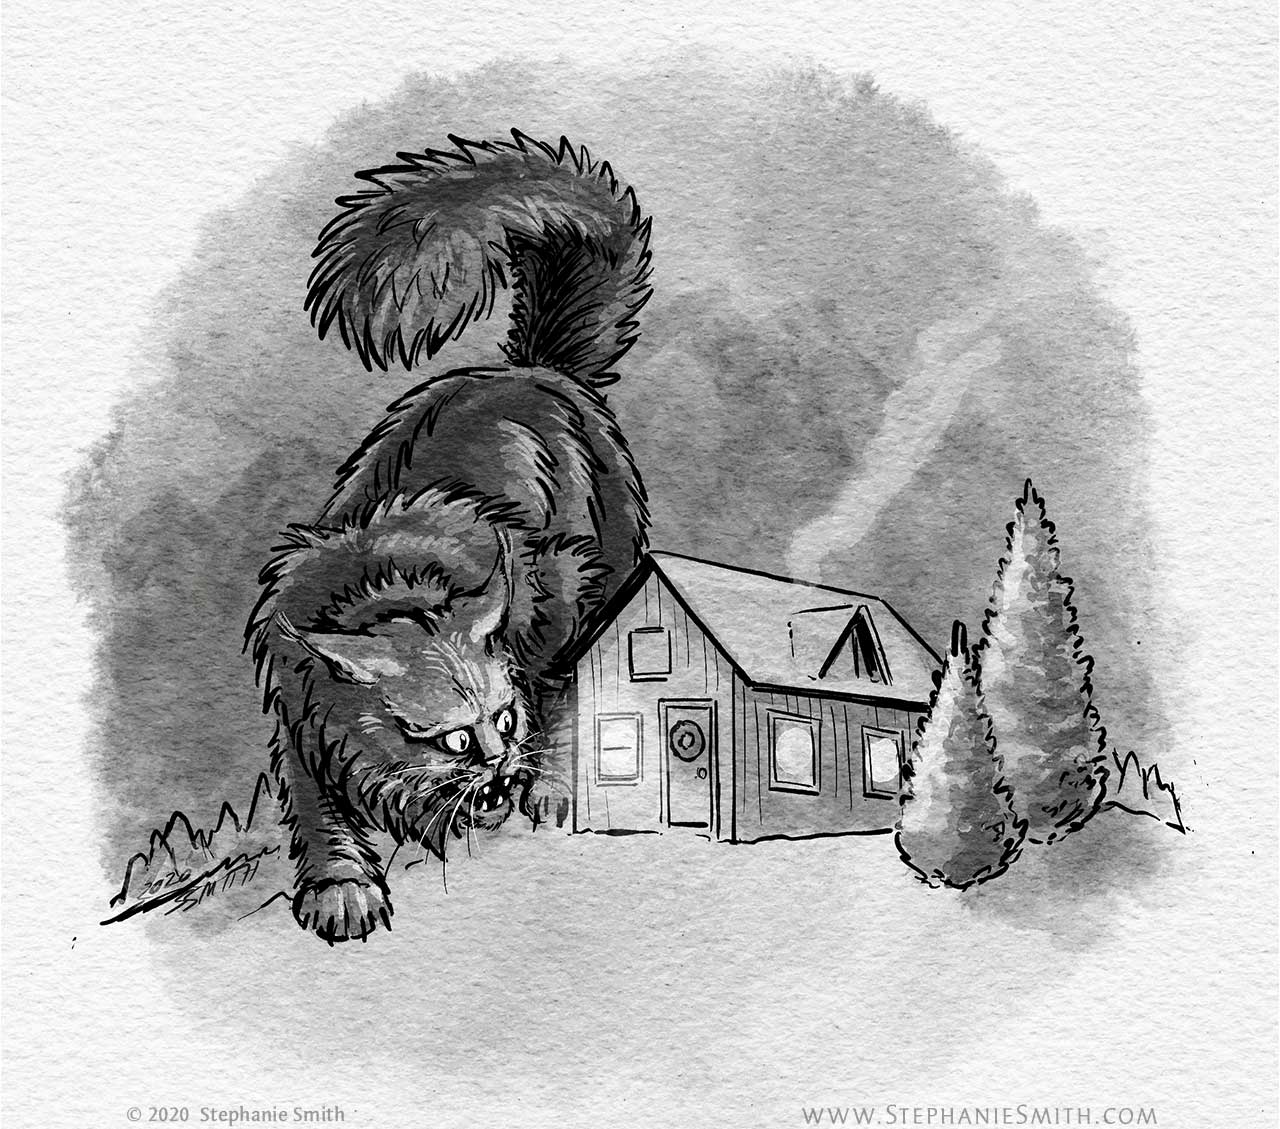 Drawing of a giant black cat peeking in the window of a small house in the winter woods.